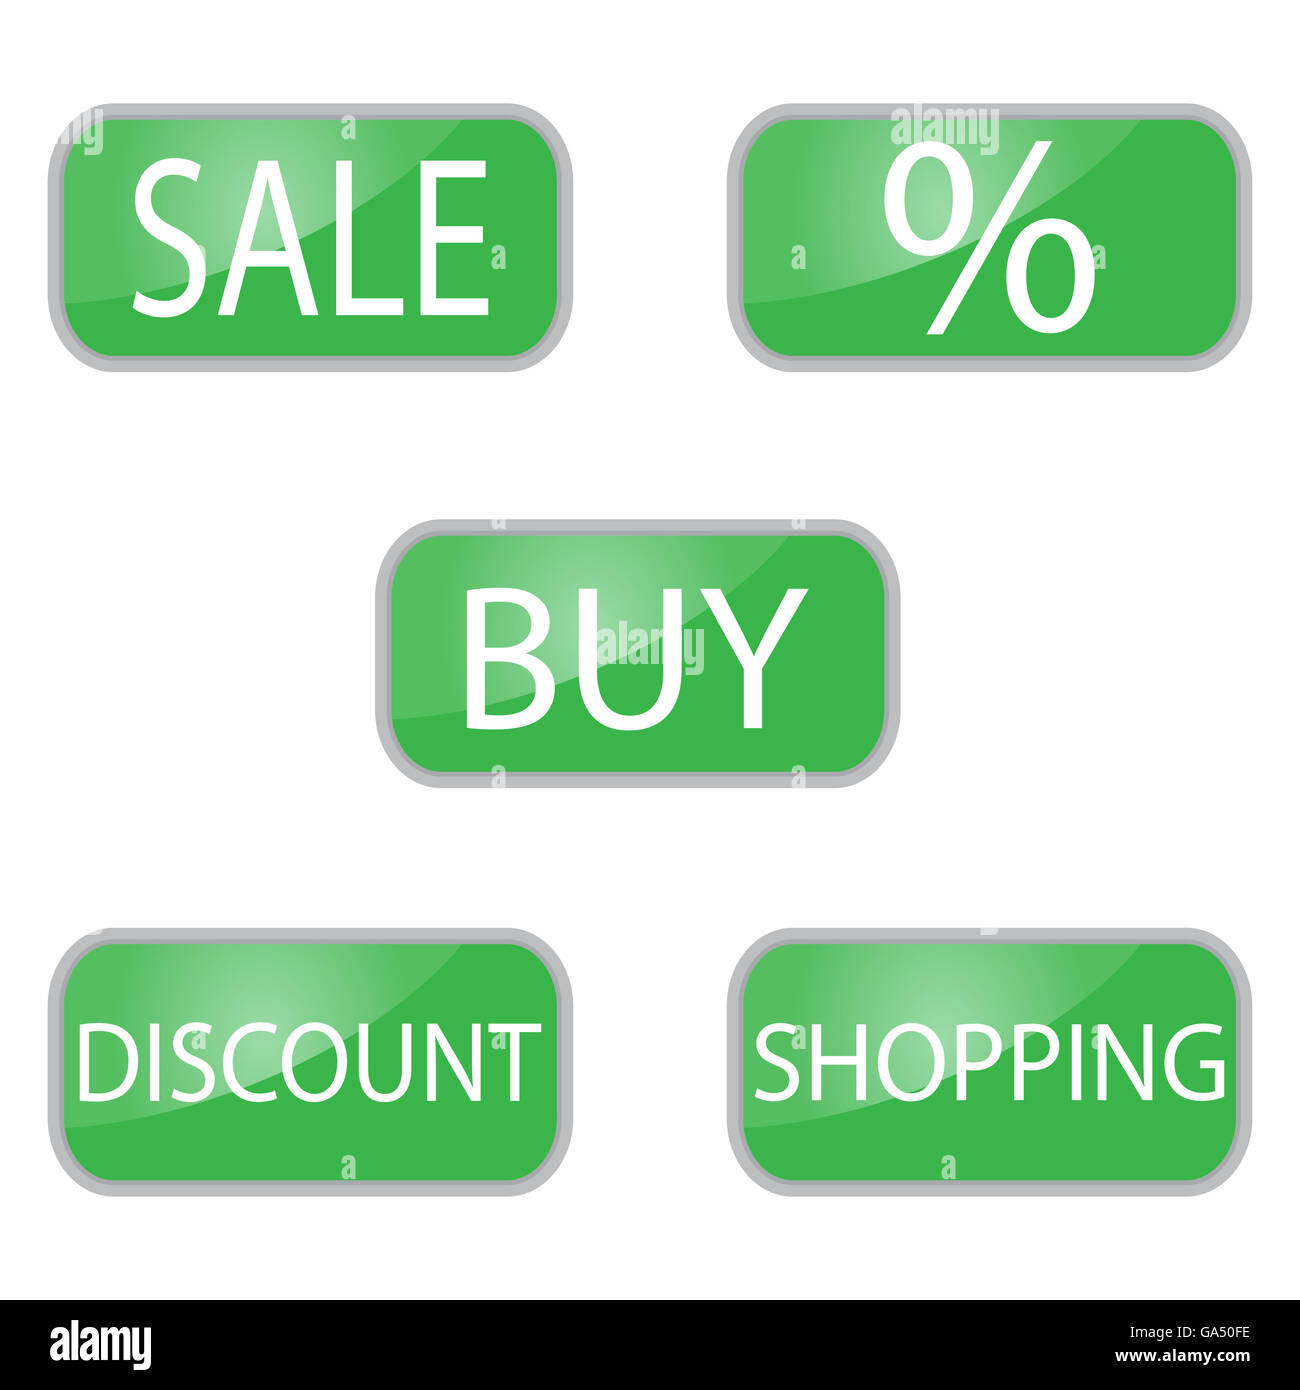 Web button green color for shooping and online shop. Shopping icon for sale sign, discount and sale tag,. Vector illustration Stock Photo